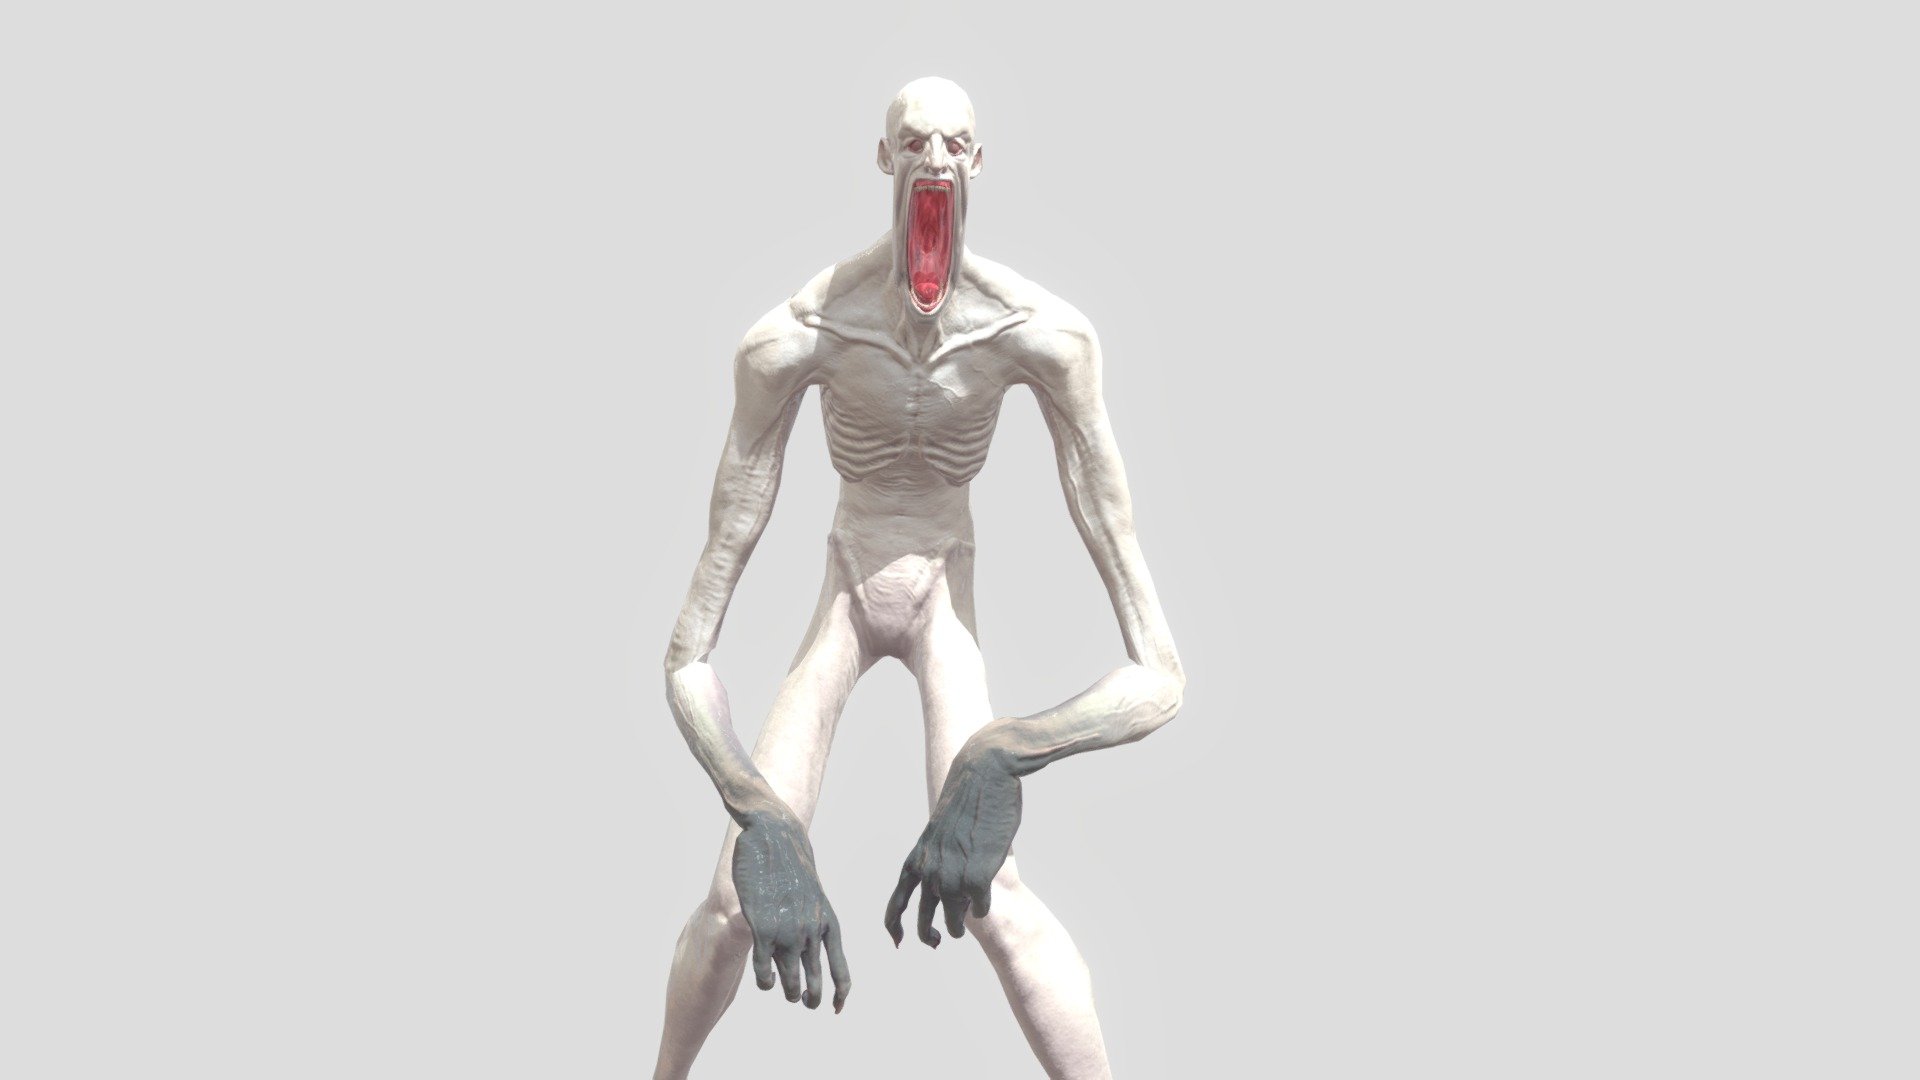 New SCP-096 : SCP